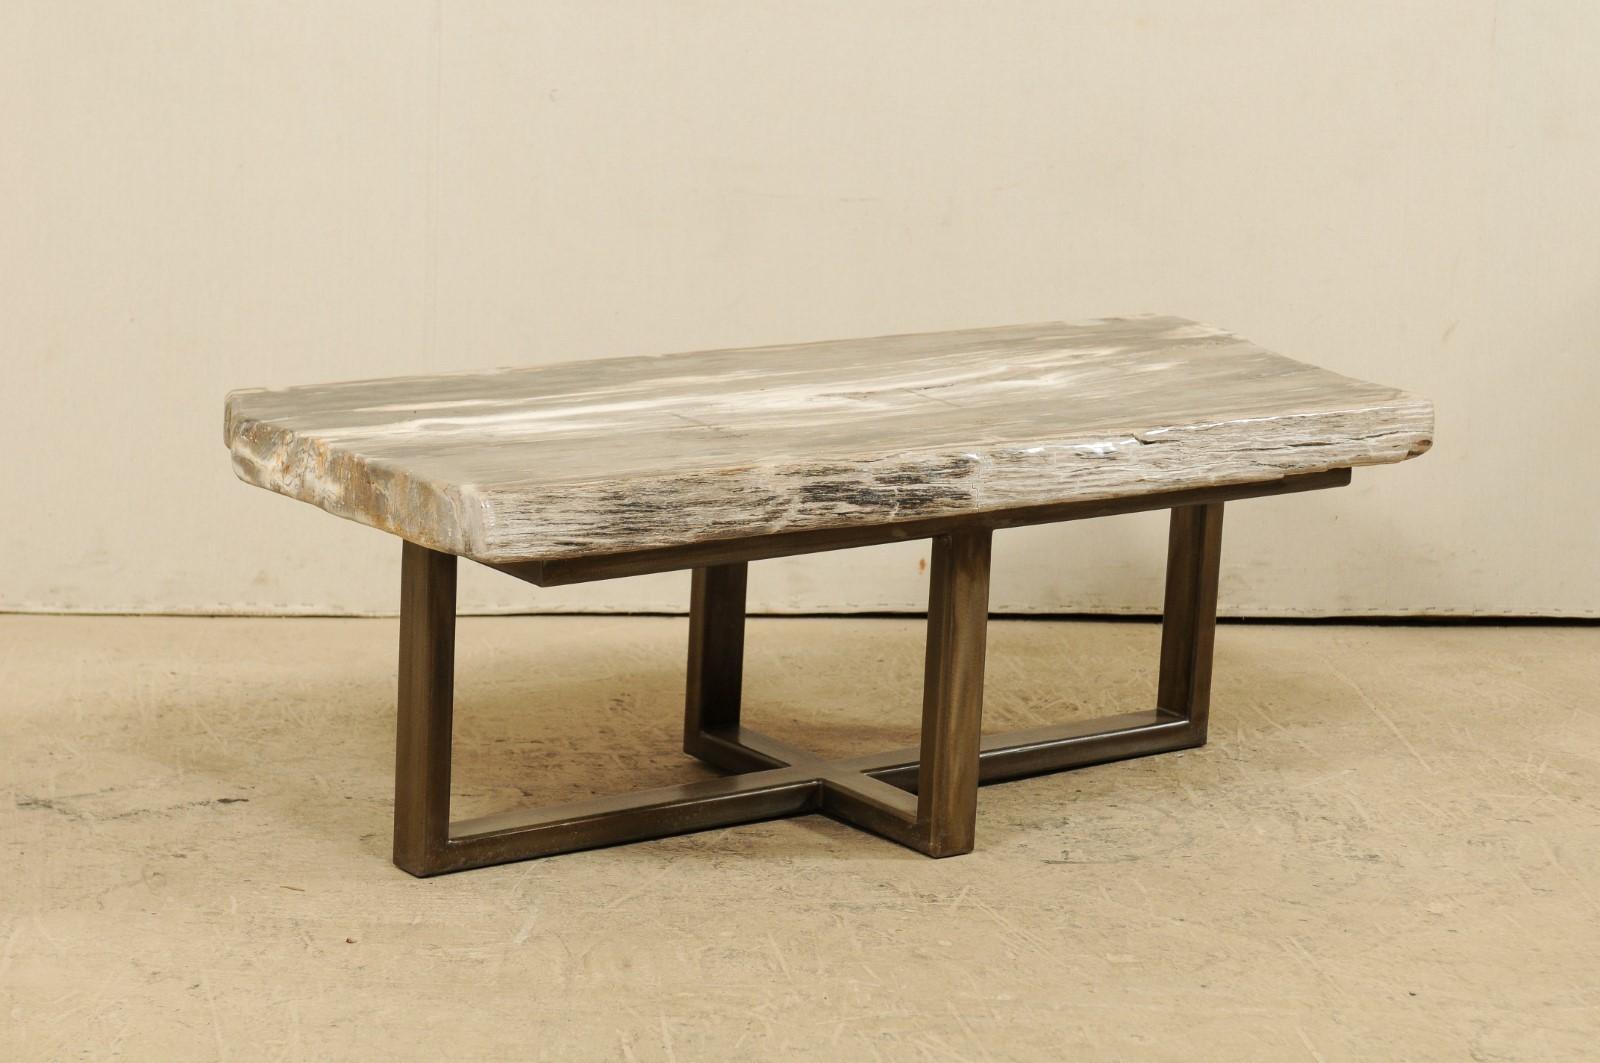 Petrified Wood Slab Bench or Coffee Table with Modern Base (Moderne)